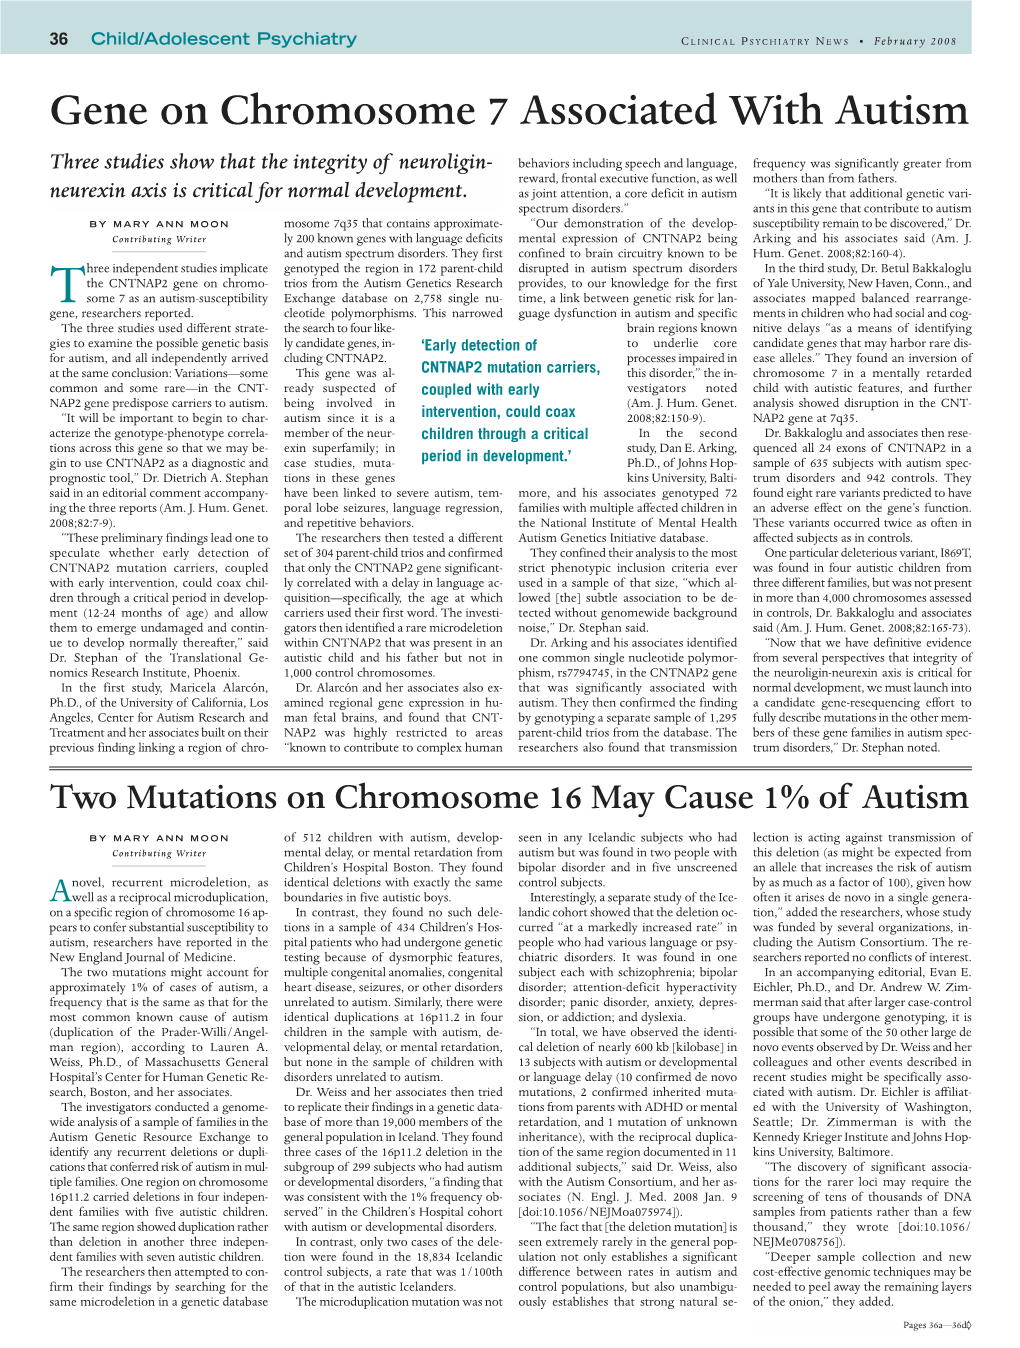 Gene on Chromosome 7 Associated with Autism